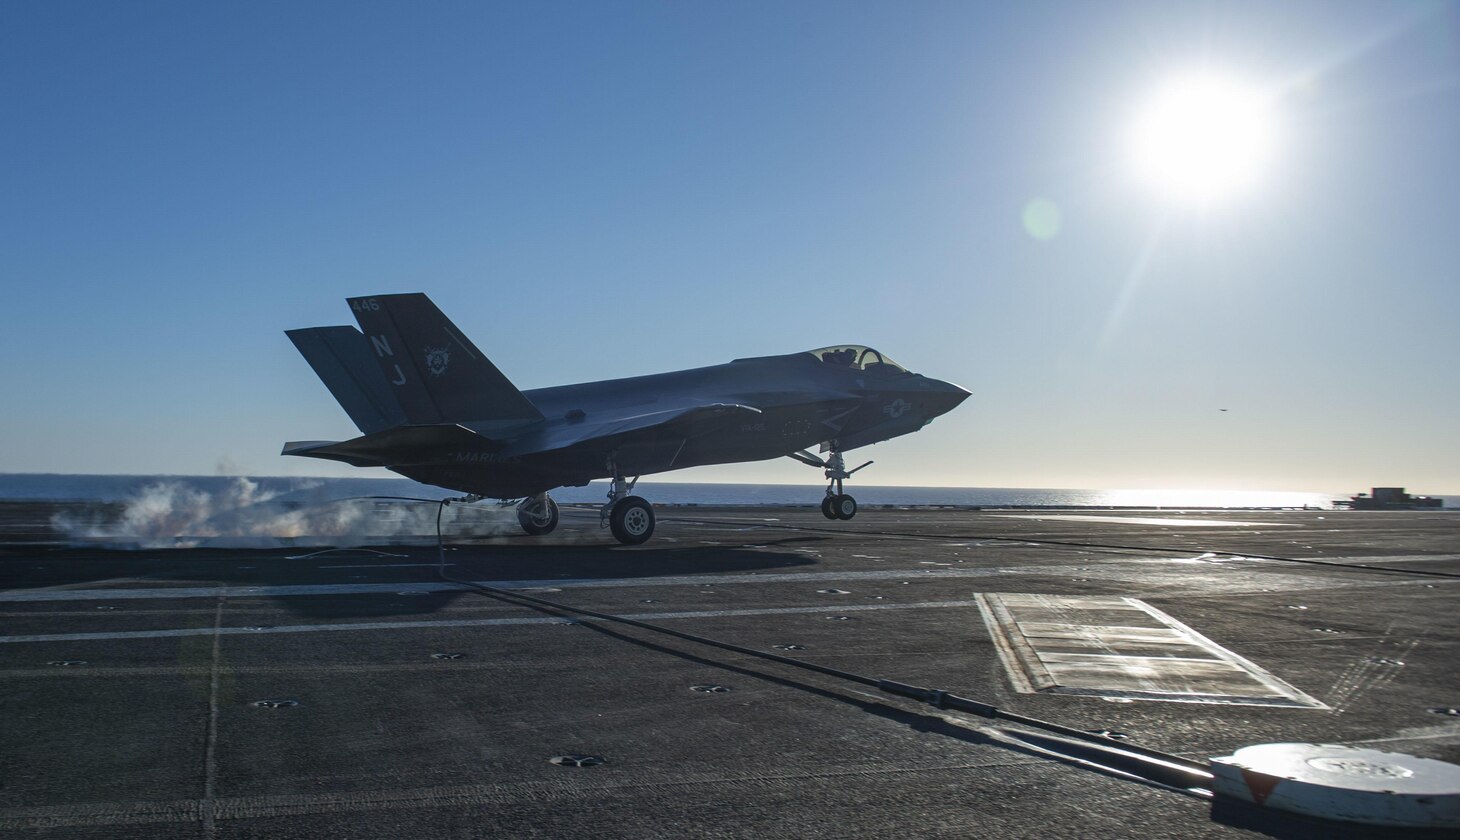 An F-35C Lightning II, from the "Rough Raiders" of Strike Fighter Squadron (VFA) 125, makes an arrested gear landing on the flight deck of the aircraft carrier USS Nimitz (CVN 68). Nimitz is underway preparing for future operations.